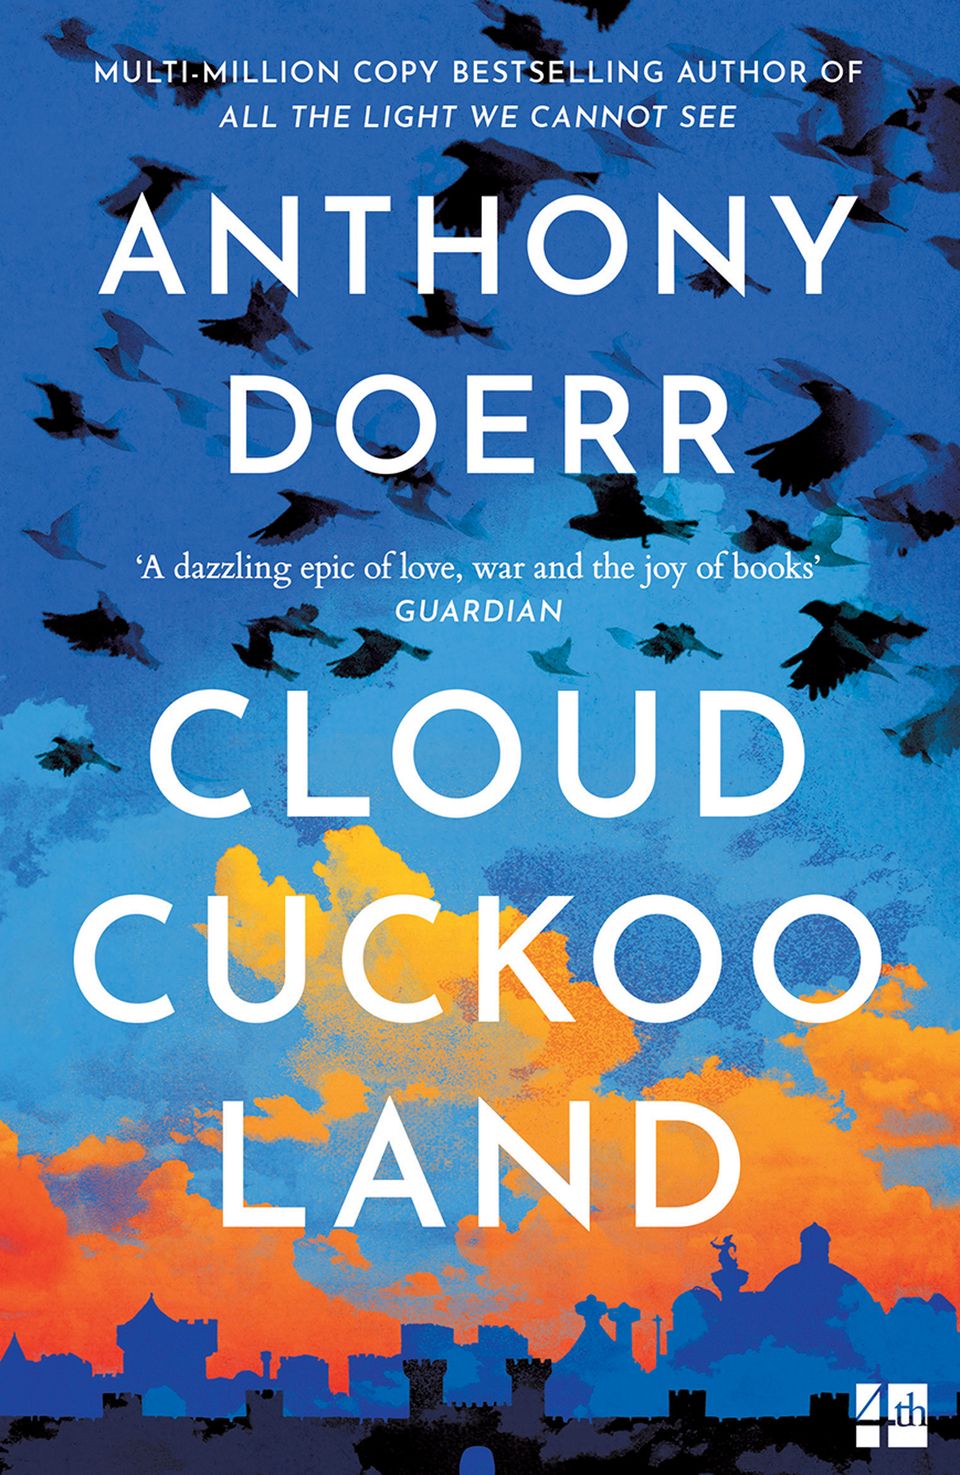 book review cloud cuckoo land